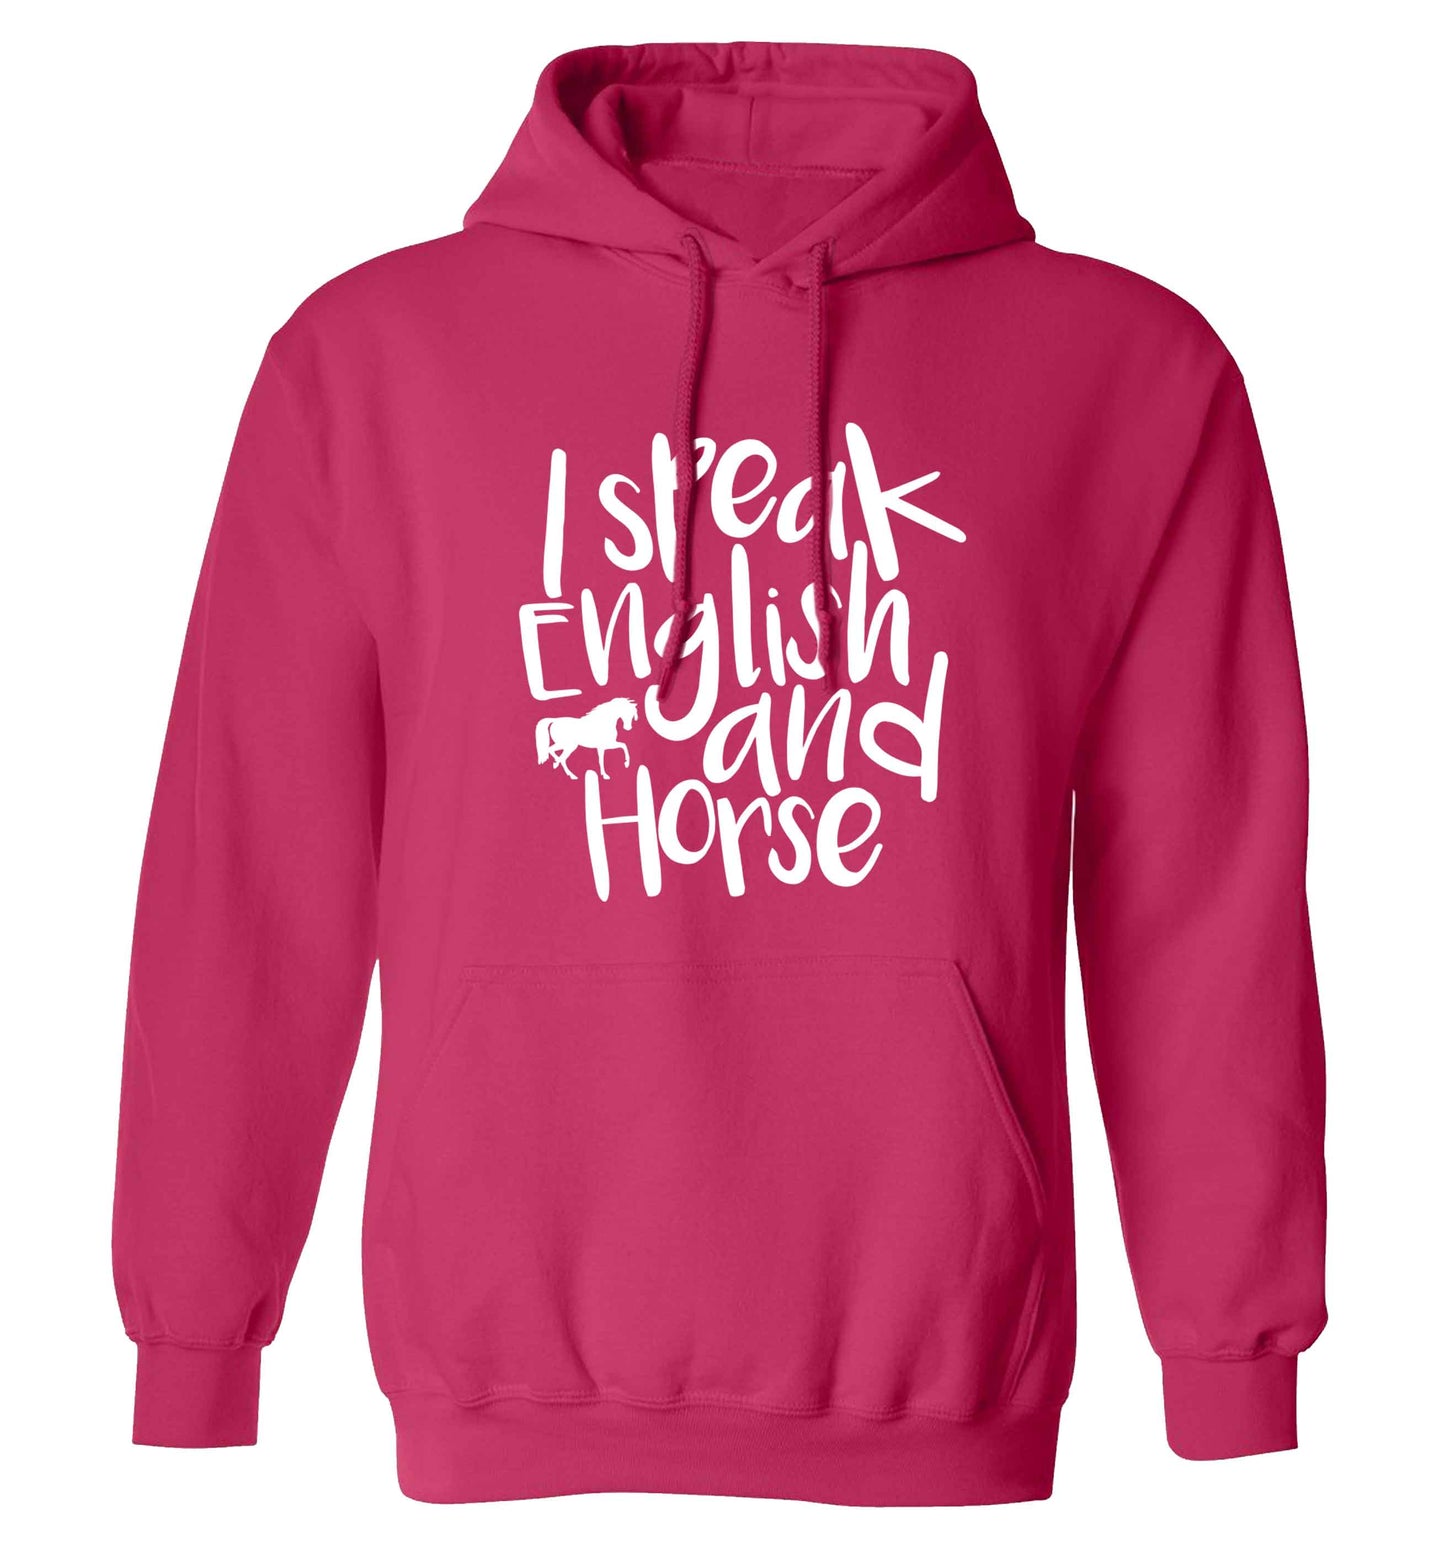 I speak English and horse adults unisex pink hoodie 2XL